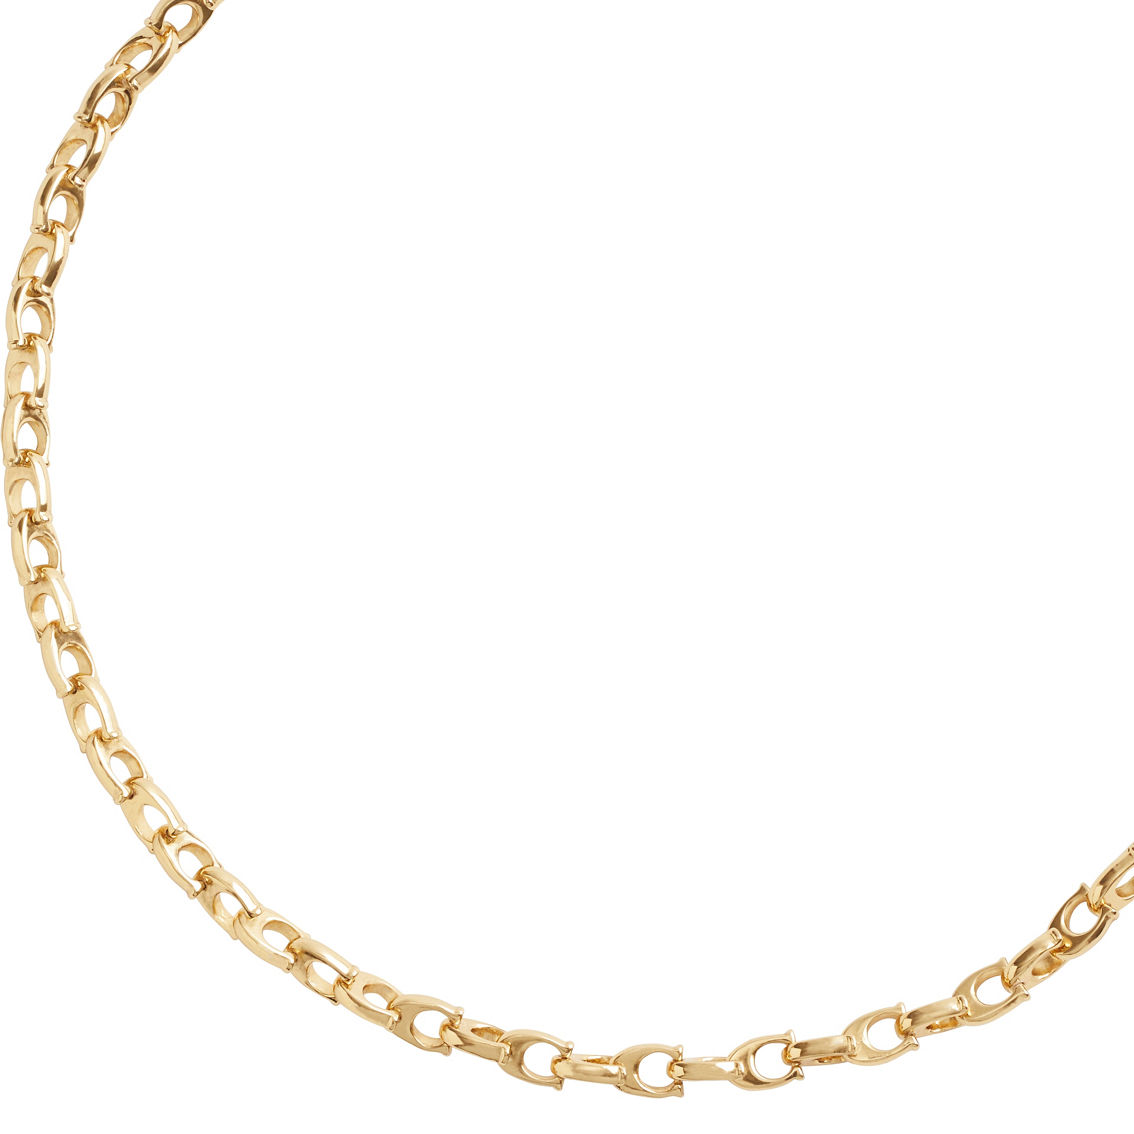 Coach Gold Signature C Choker Necklace 12 in. - Image 2 of 3